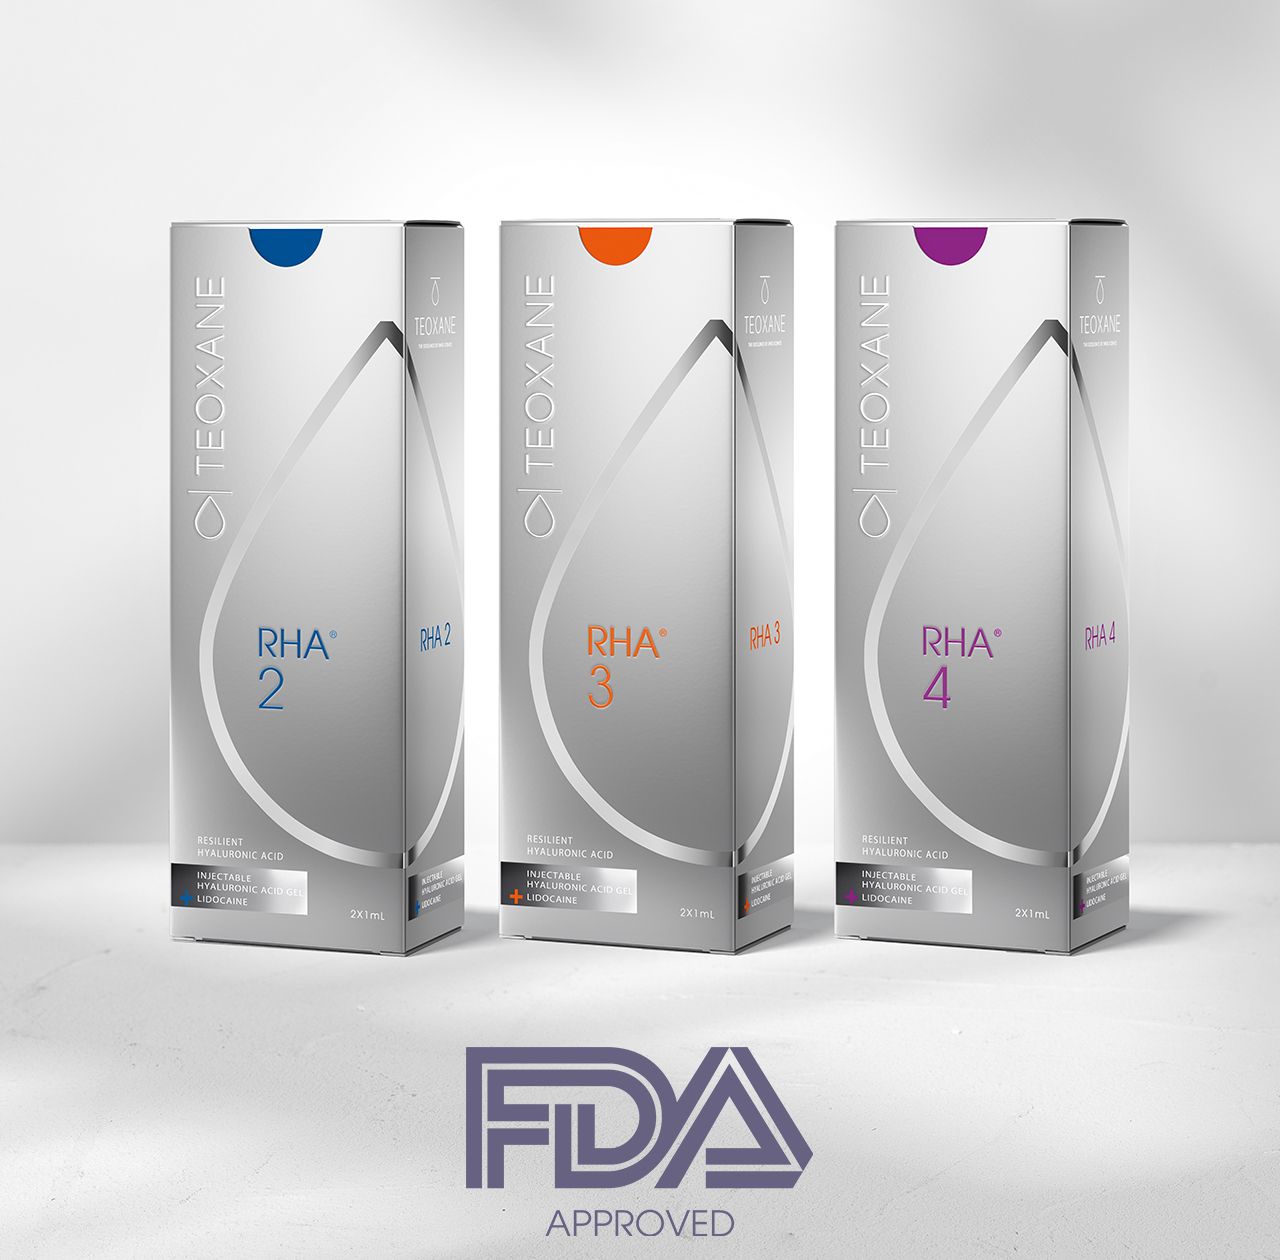 FDA approval for RHA® 2, RHA® 3, RHA® 4 for the correction of moderate to severe dynamic facial wrinkles and folds.